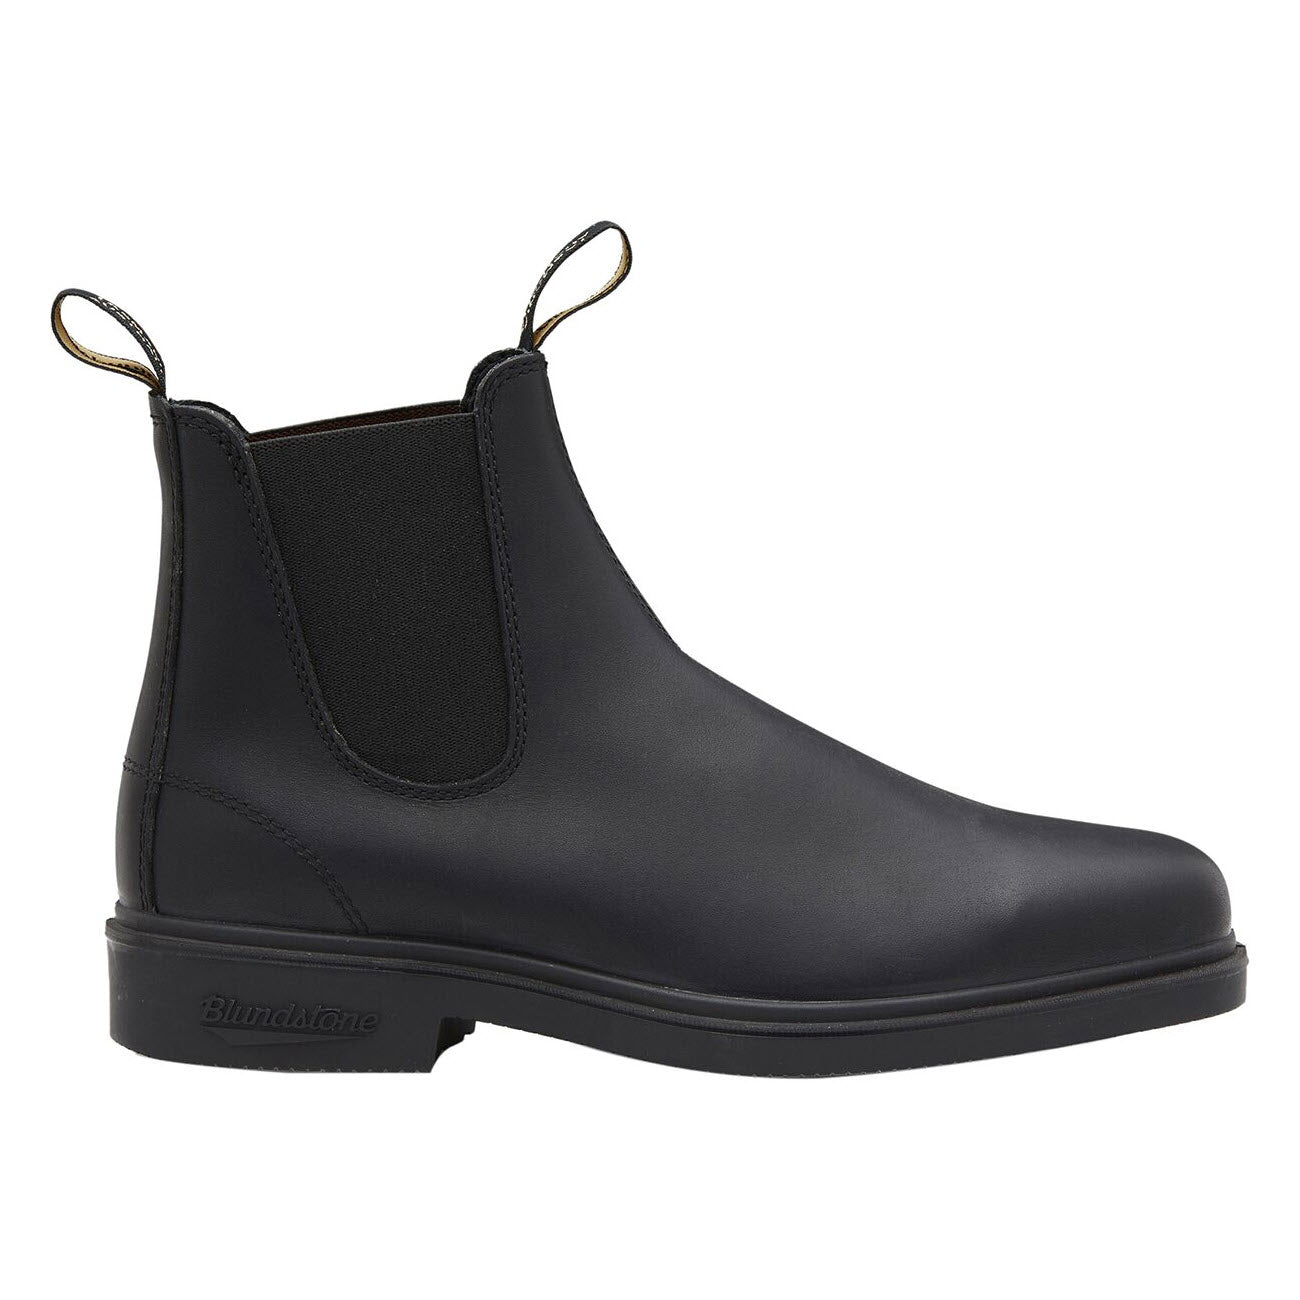 Blundstone 063 Dress Boot Black - Women's Chelsea boot with pull tabs, featuring a durable TPU outsole.